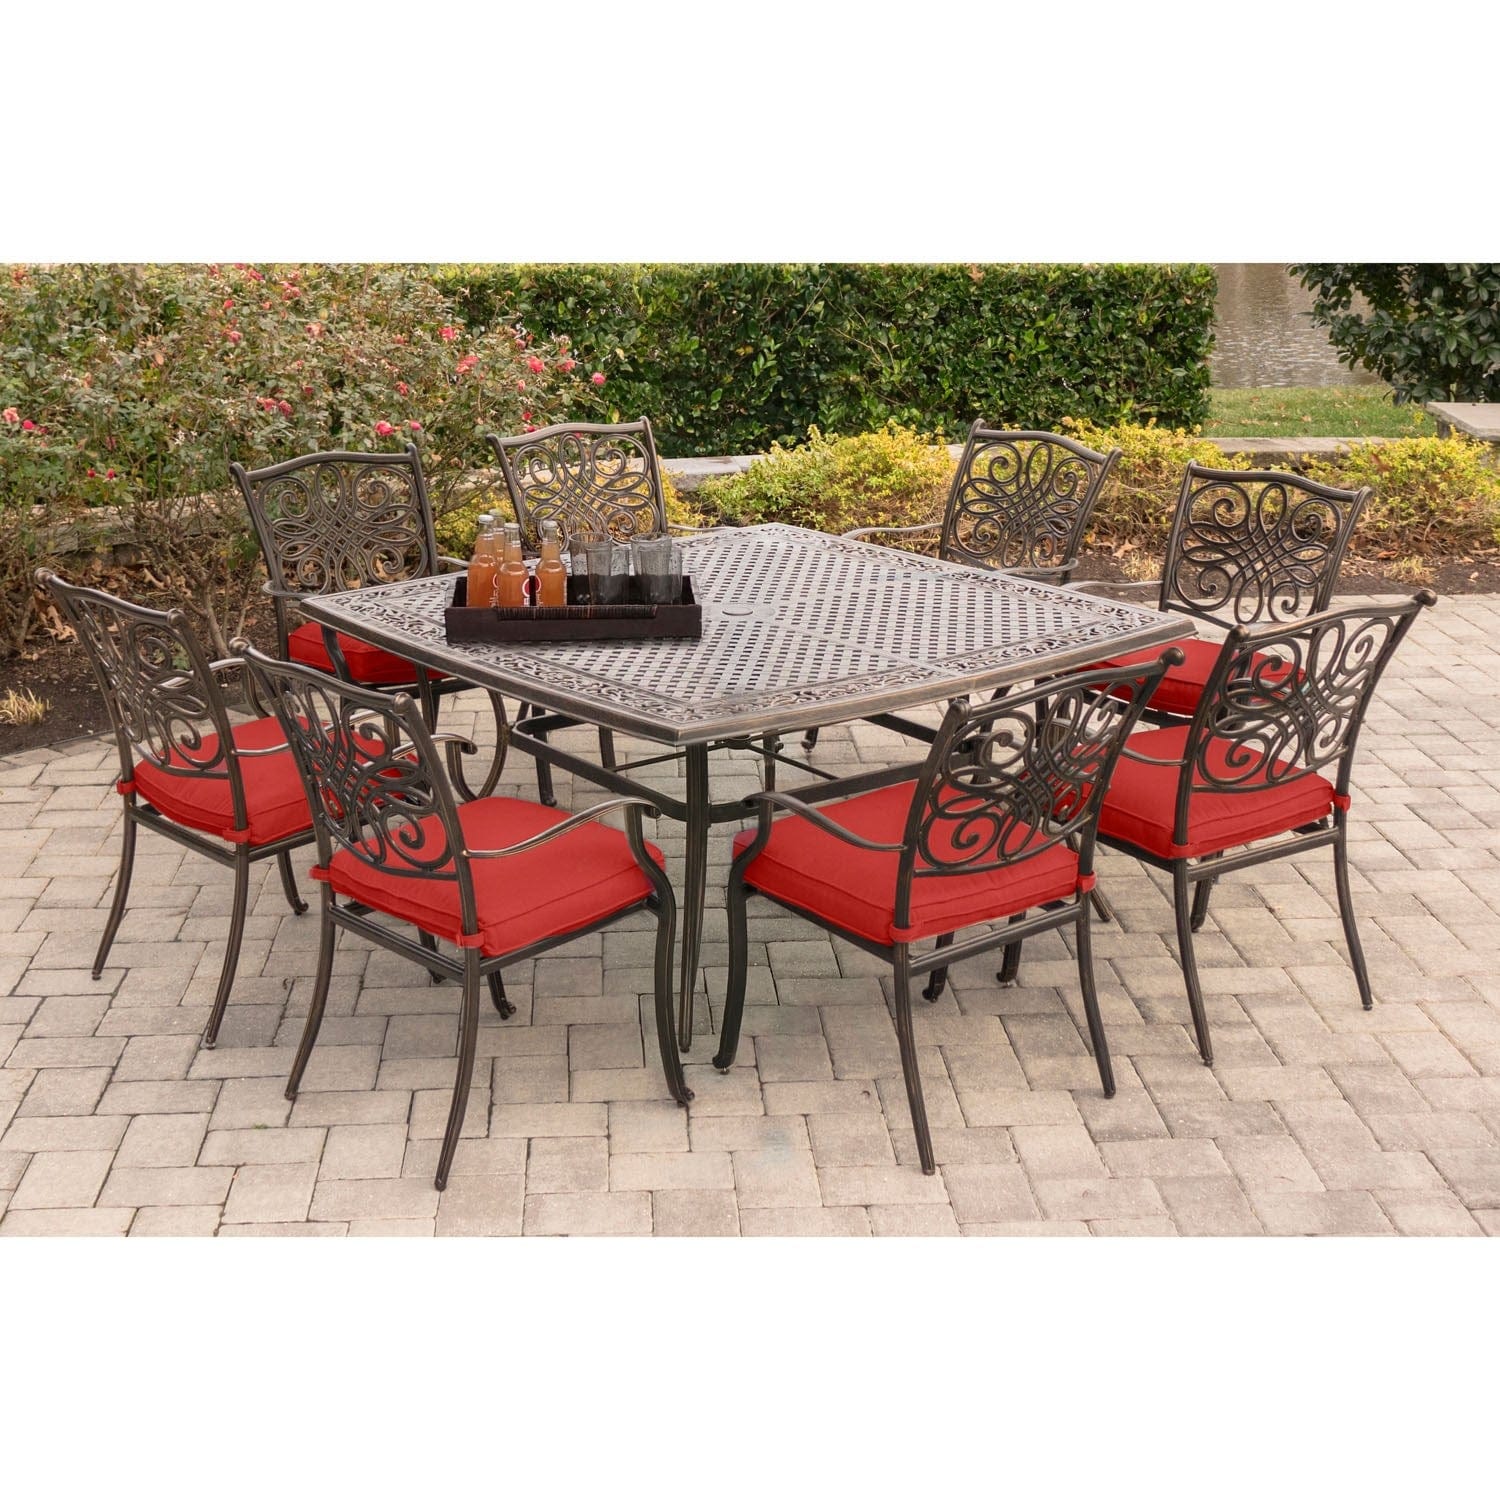 Hanover Outdoor Dining Set Hanover - Traditions 9-Piece Aluminum Frame Dining Set with Eight Dining Chairs Square Dining Set | Red/Cast | TRADDN9PCSQ-RED